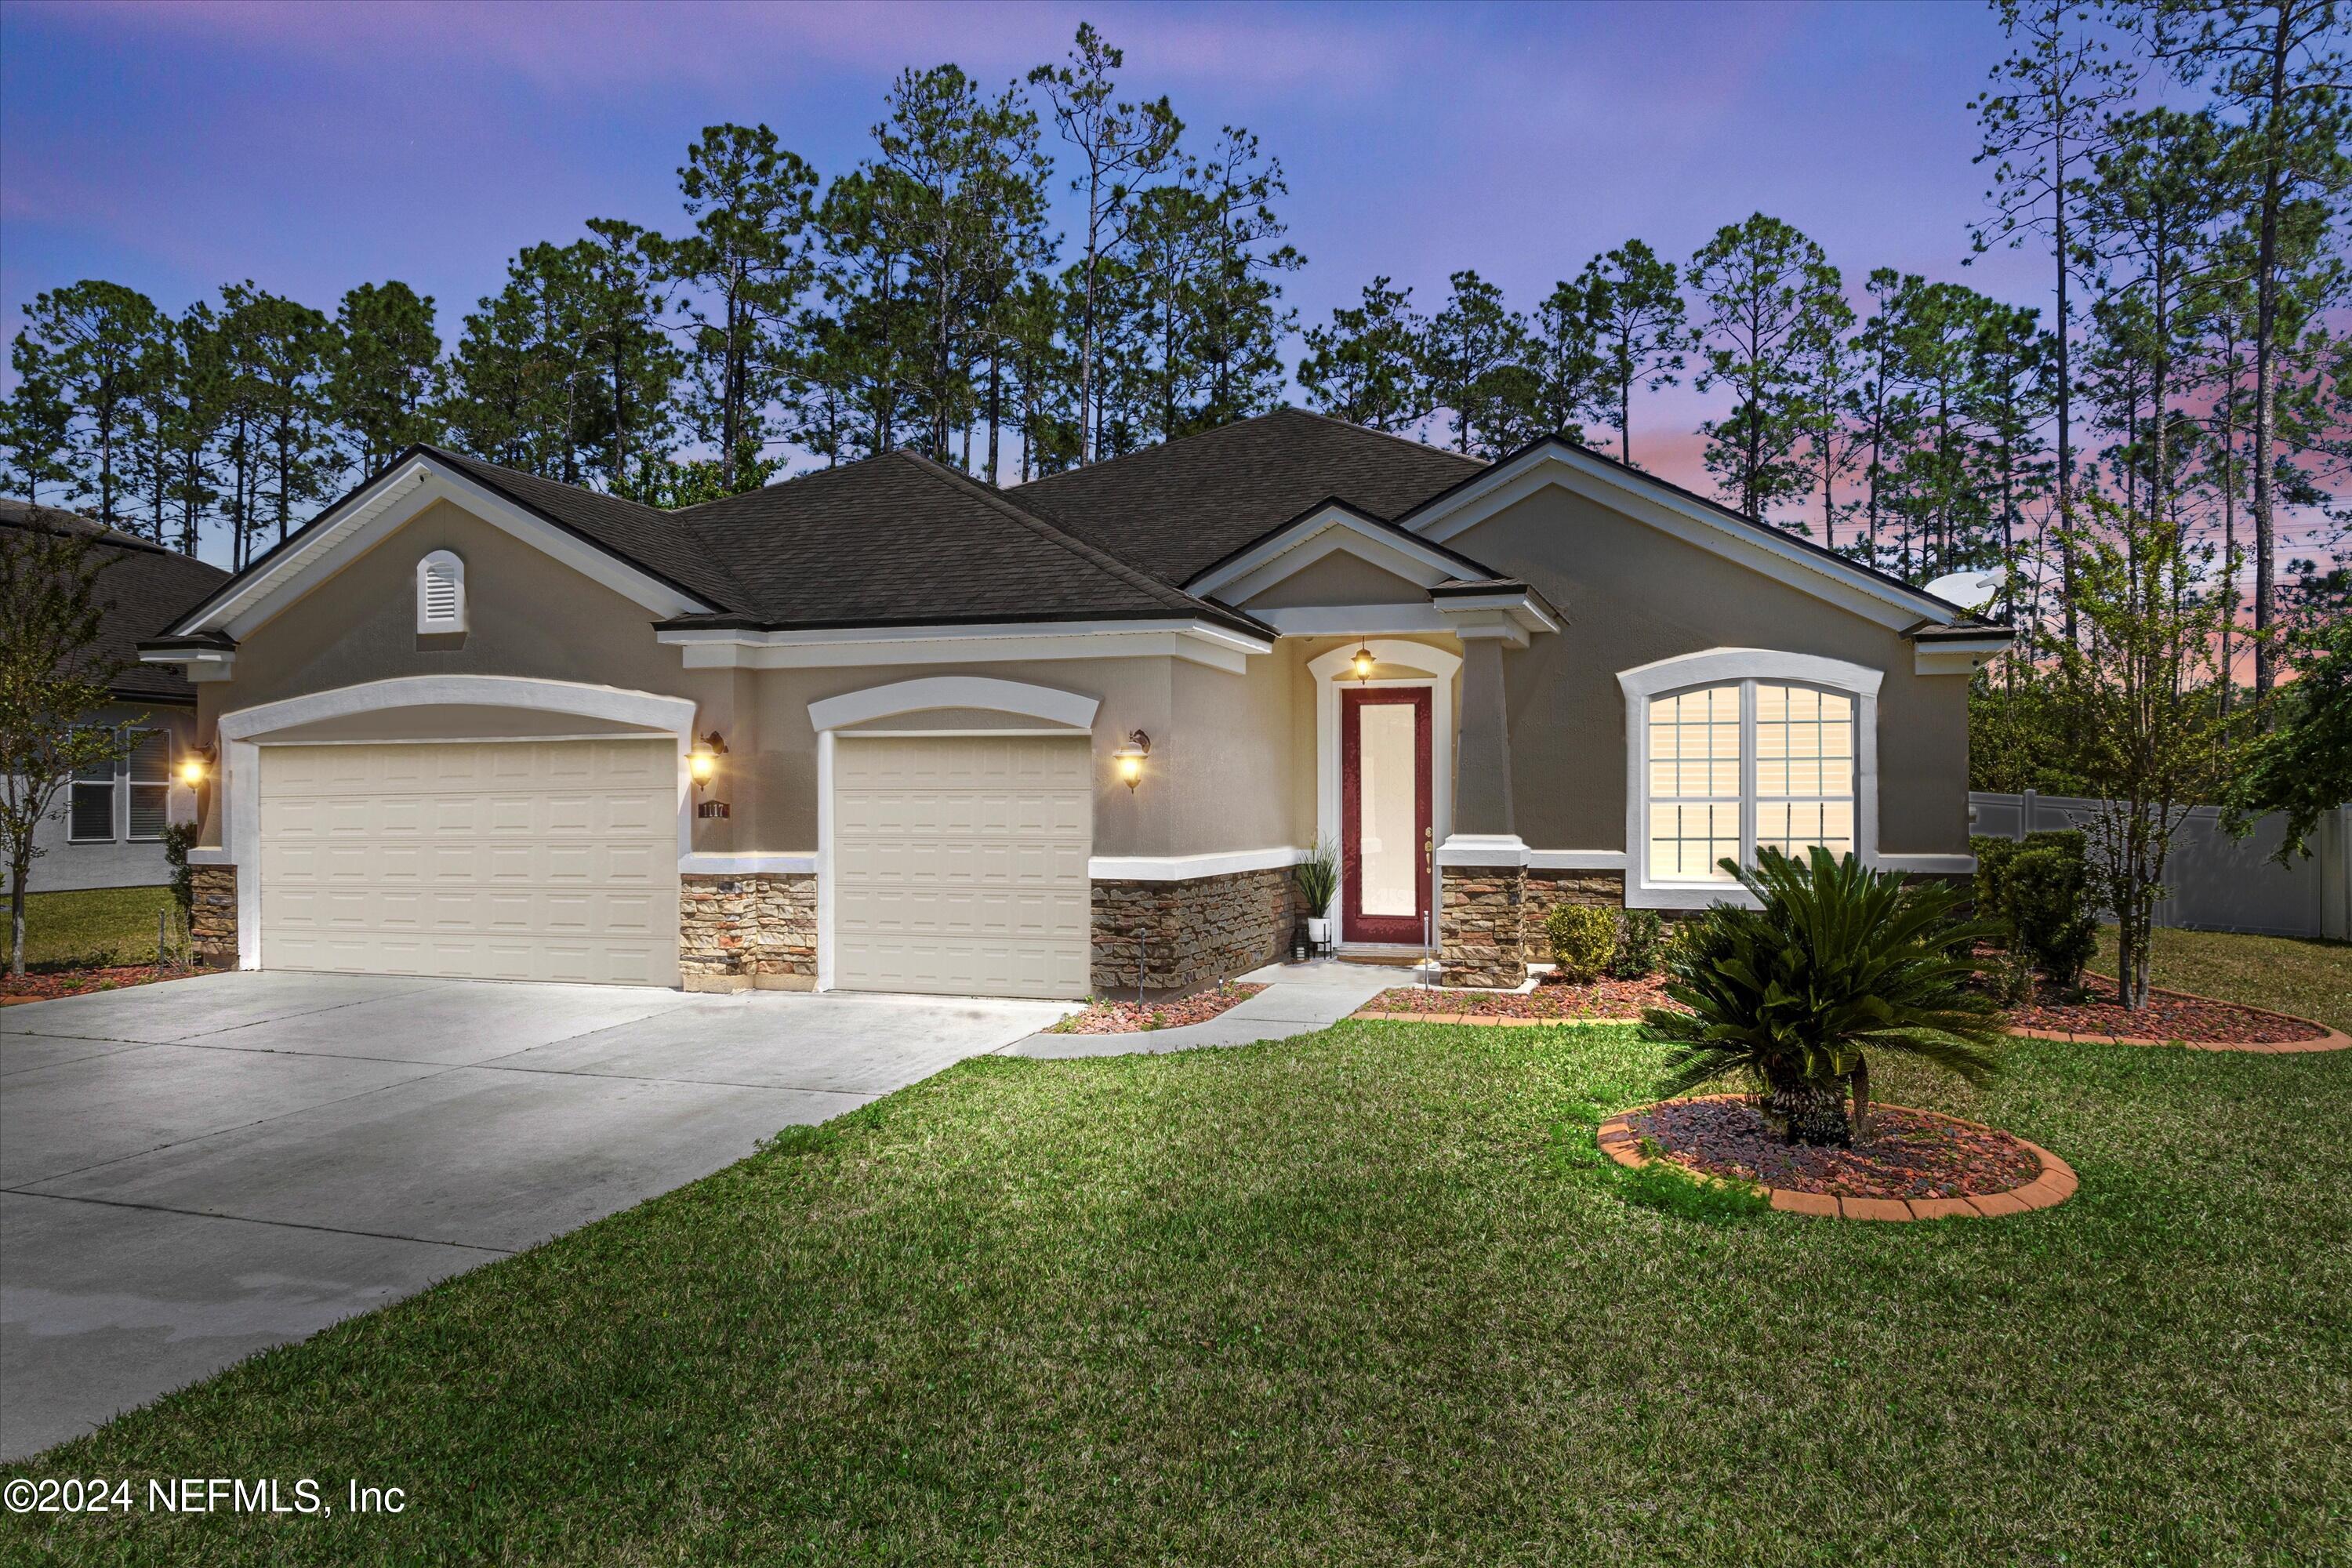 Middleburg, FL home for sale located at 1117 ORCHARD ORIOLE Place, Middleburg, FL 32068